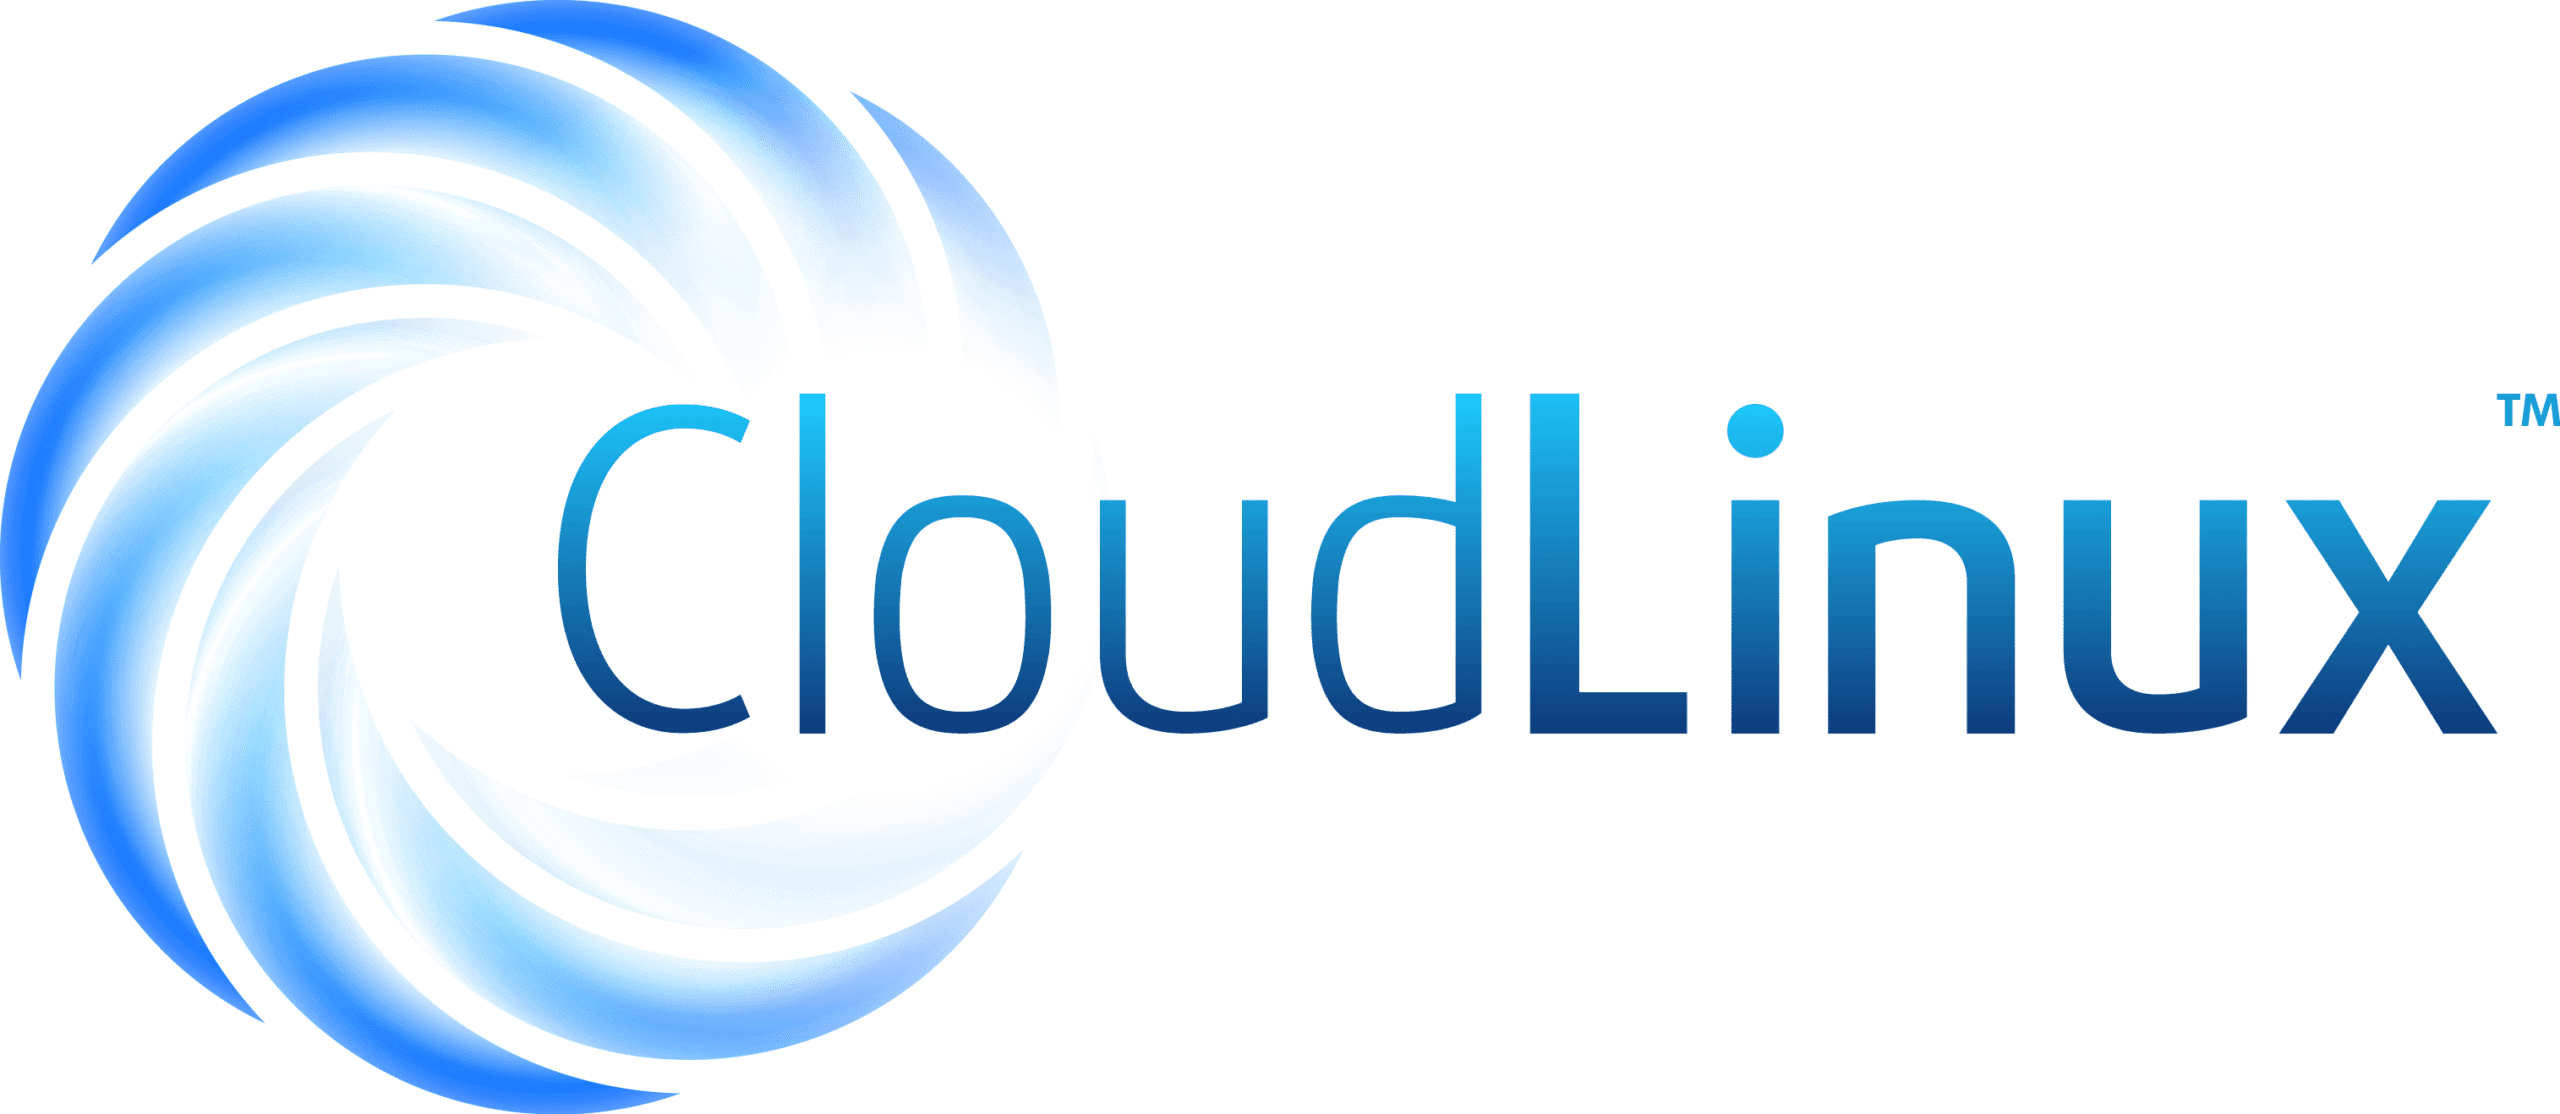 CloudLinux – A New Way we Ensure Rock Solid Reliability for Your Site